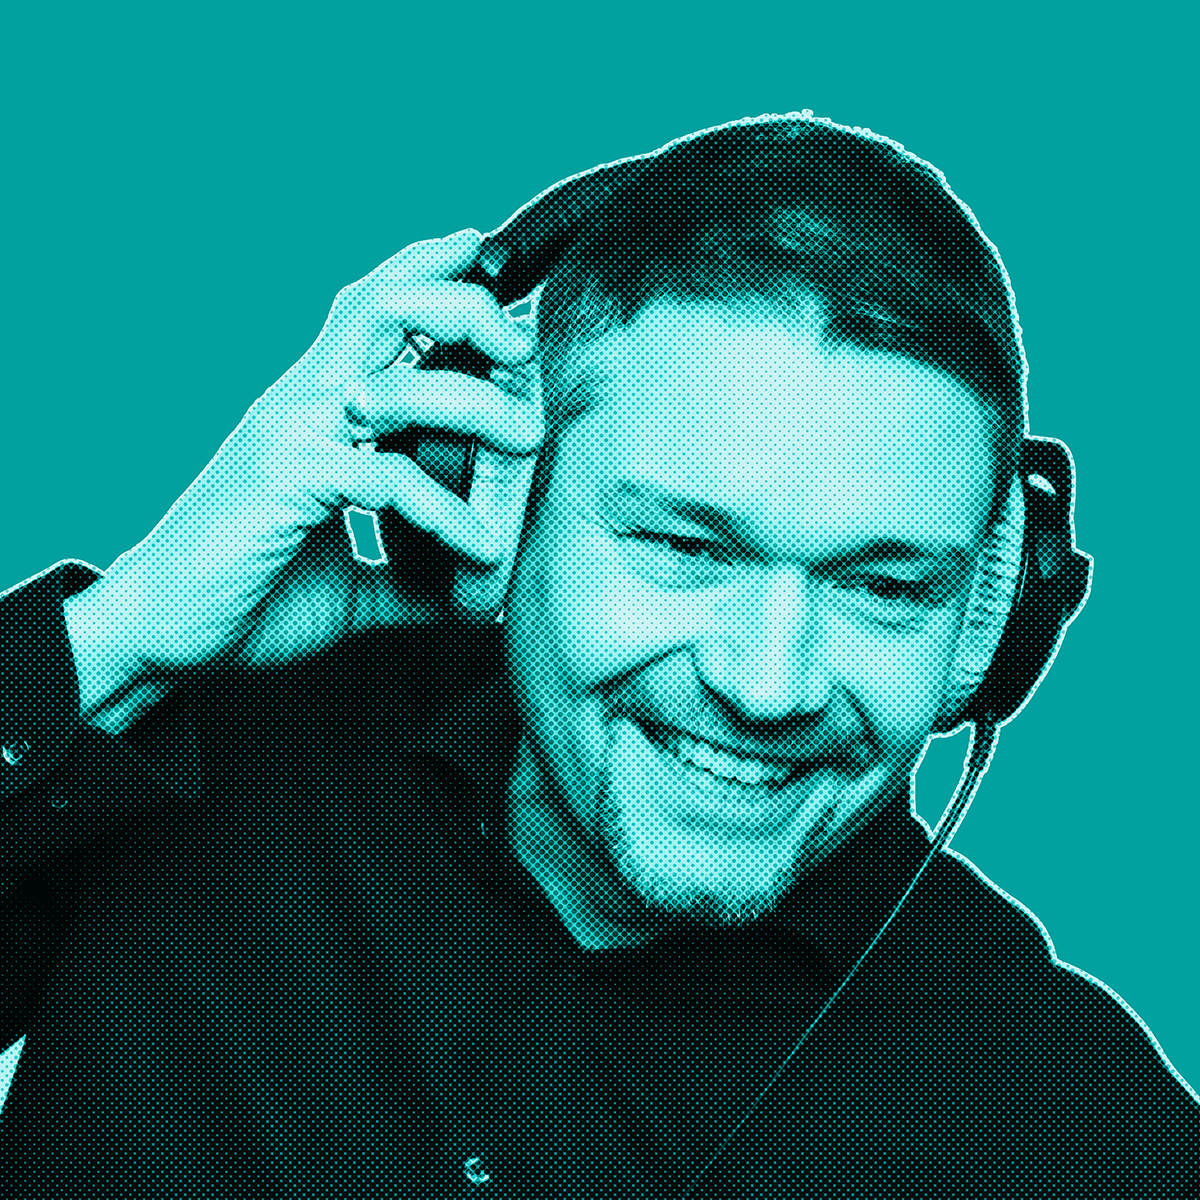 Turquoise-filtered picture of man smiling and wearing headphones, holding them with his right hand